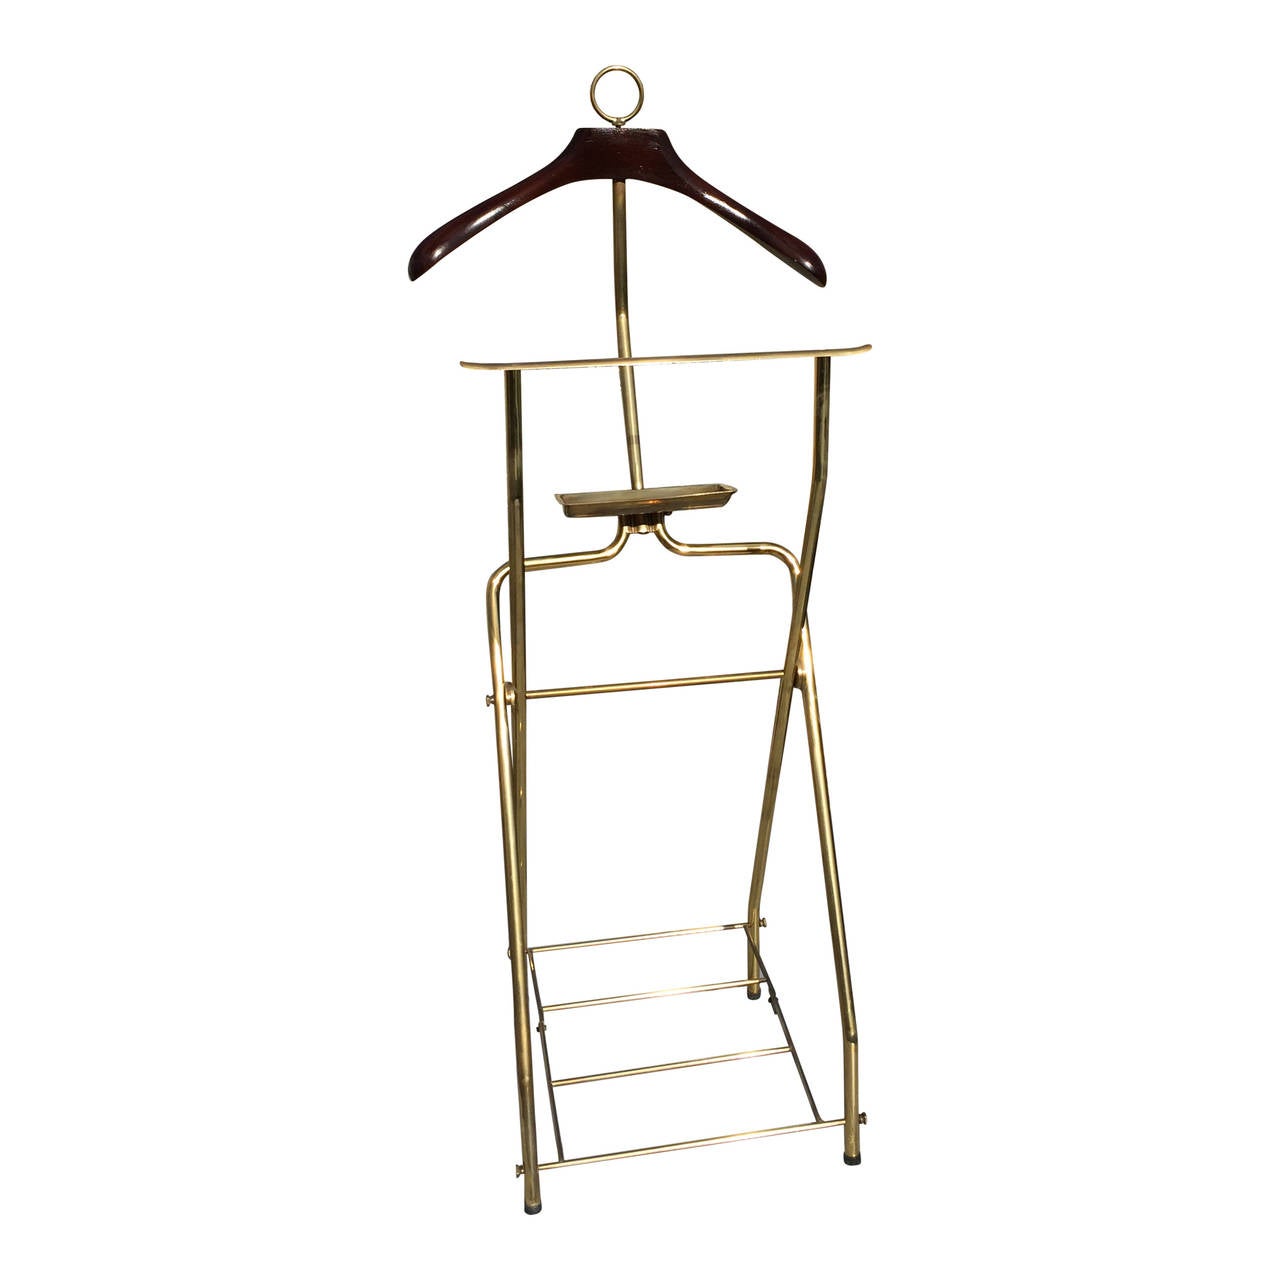 foldable brass and patinated mahogany men's valet
lower rack can be used for shoes
excellent vintage condition ; this item will ship from France
price does not include handling, shipping, rewiring and possible customs duties